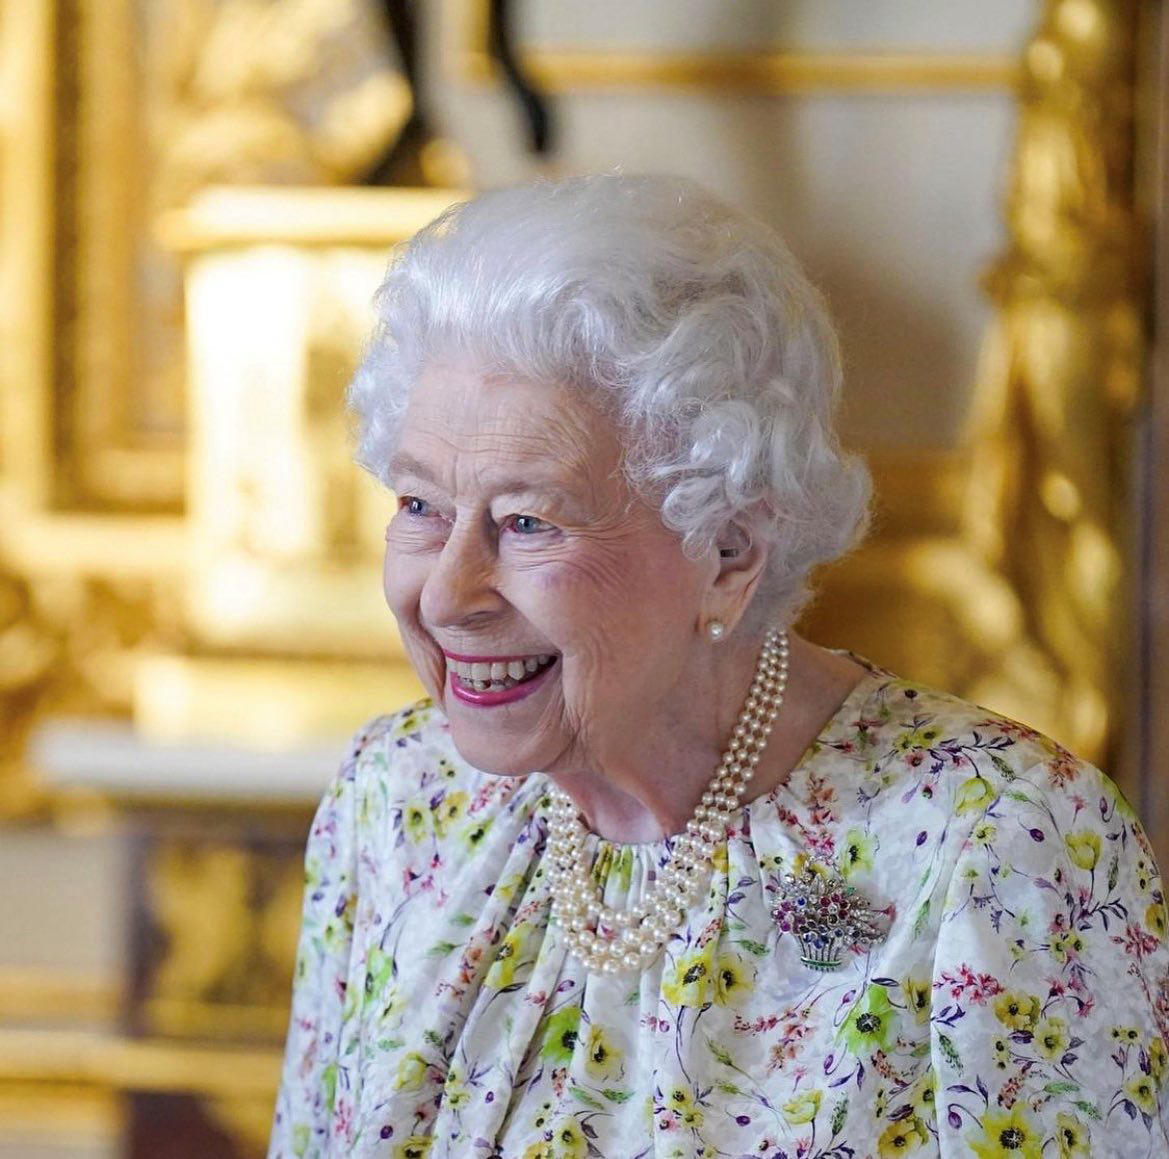 Royal Lancaster London - Luxury Hotel - We are deeply saddened to hear about the passing of Her Maje